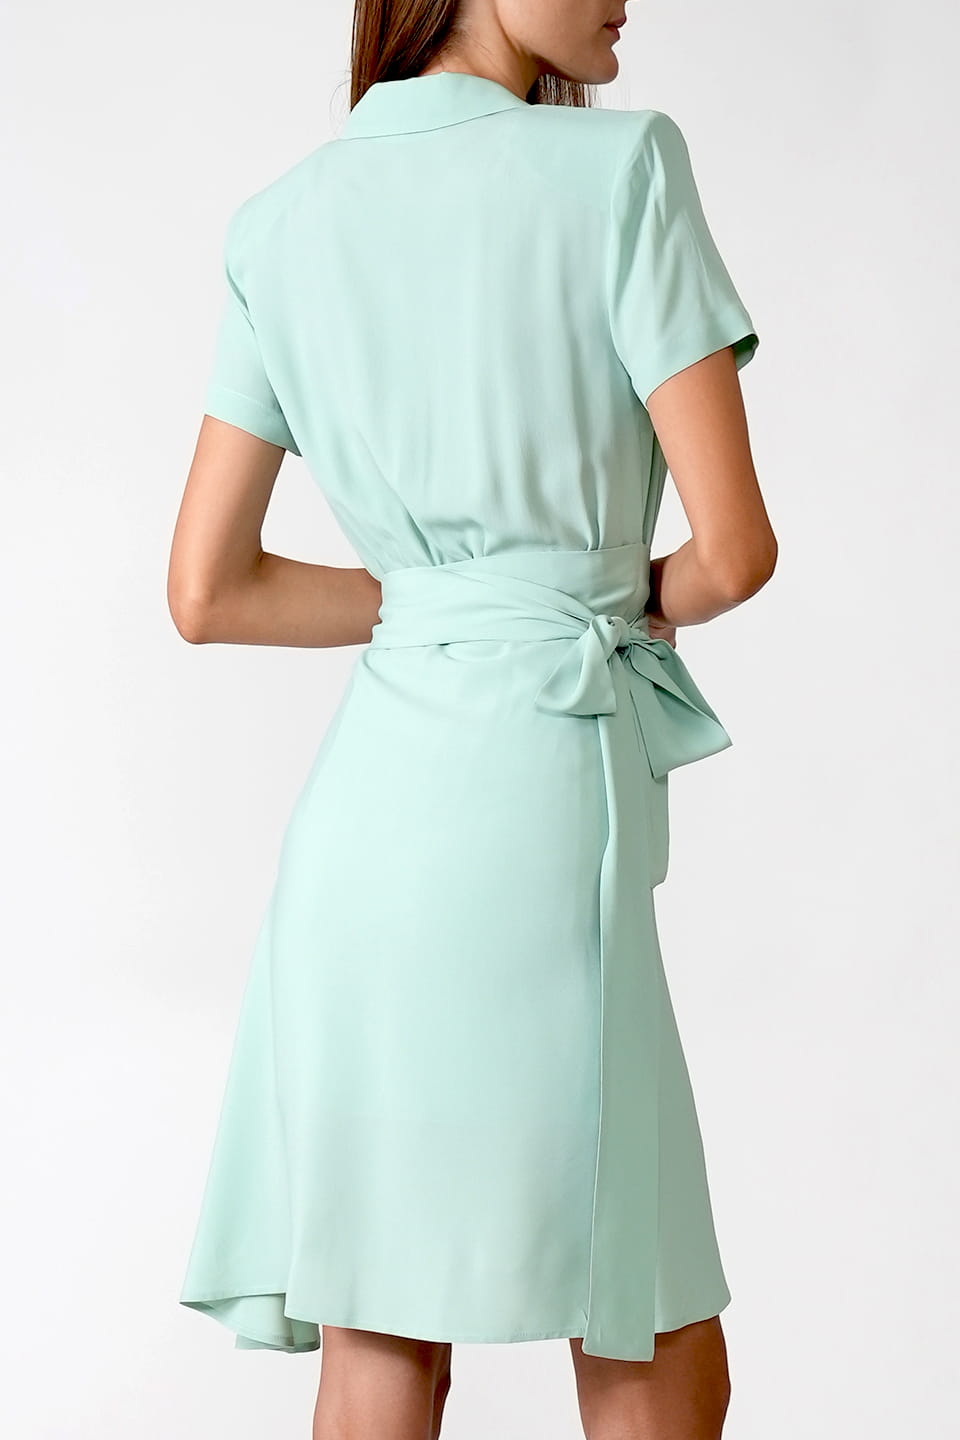 Designer Green Midi dresses, shop online with free delivery in UAE. Product gallery 4